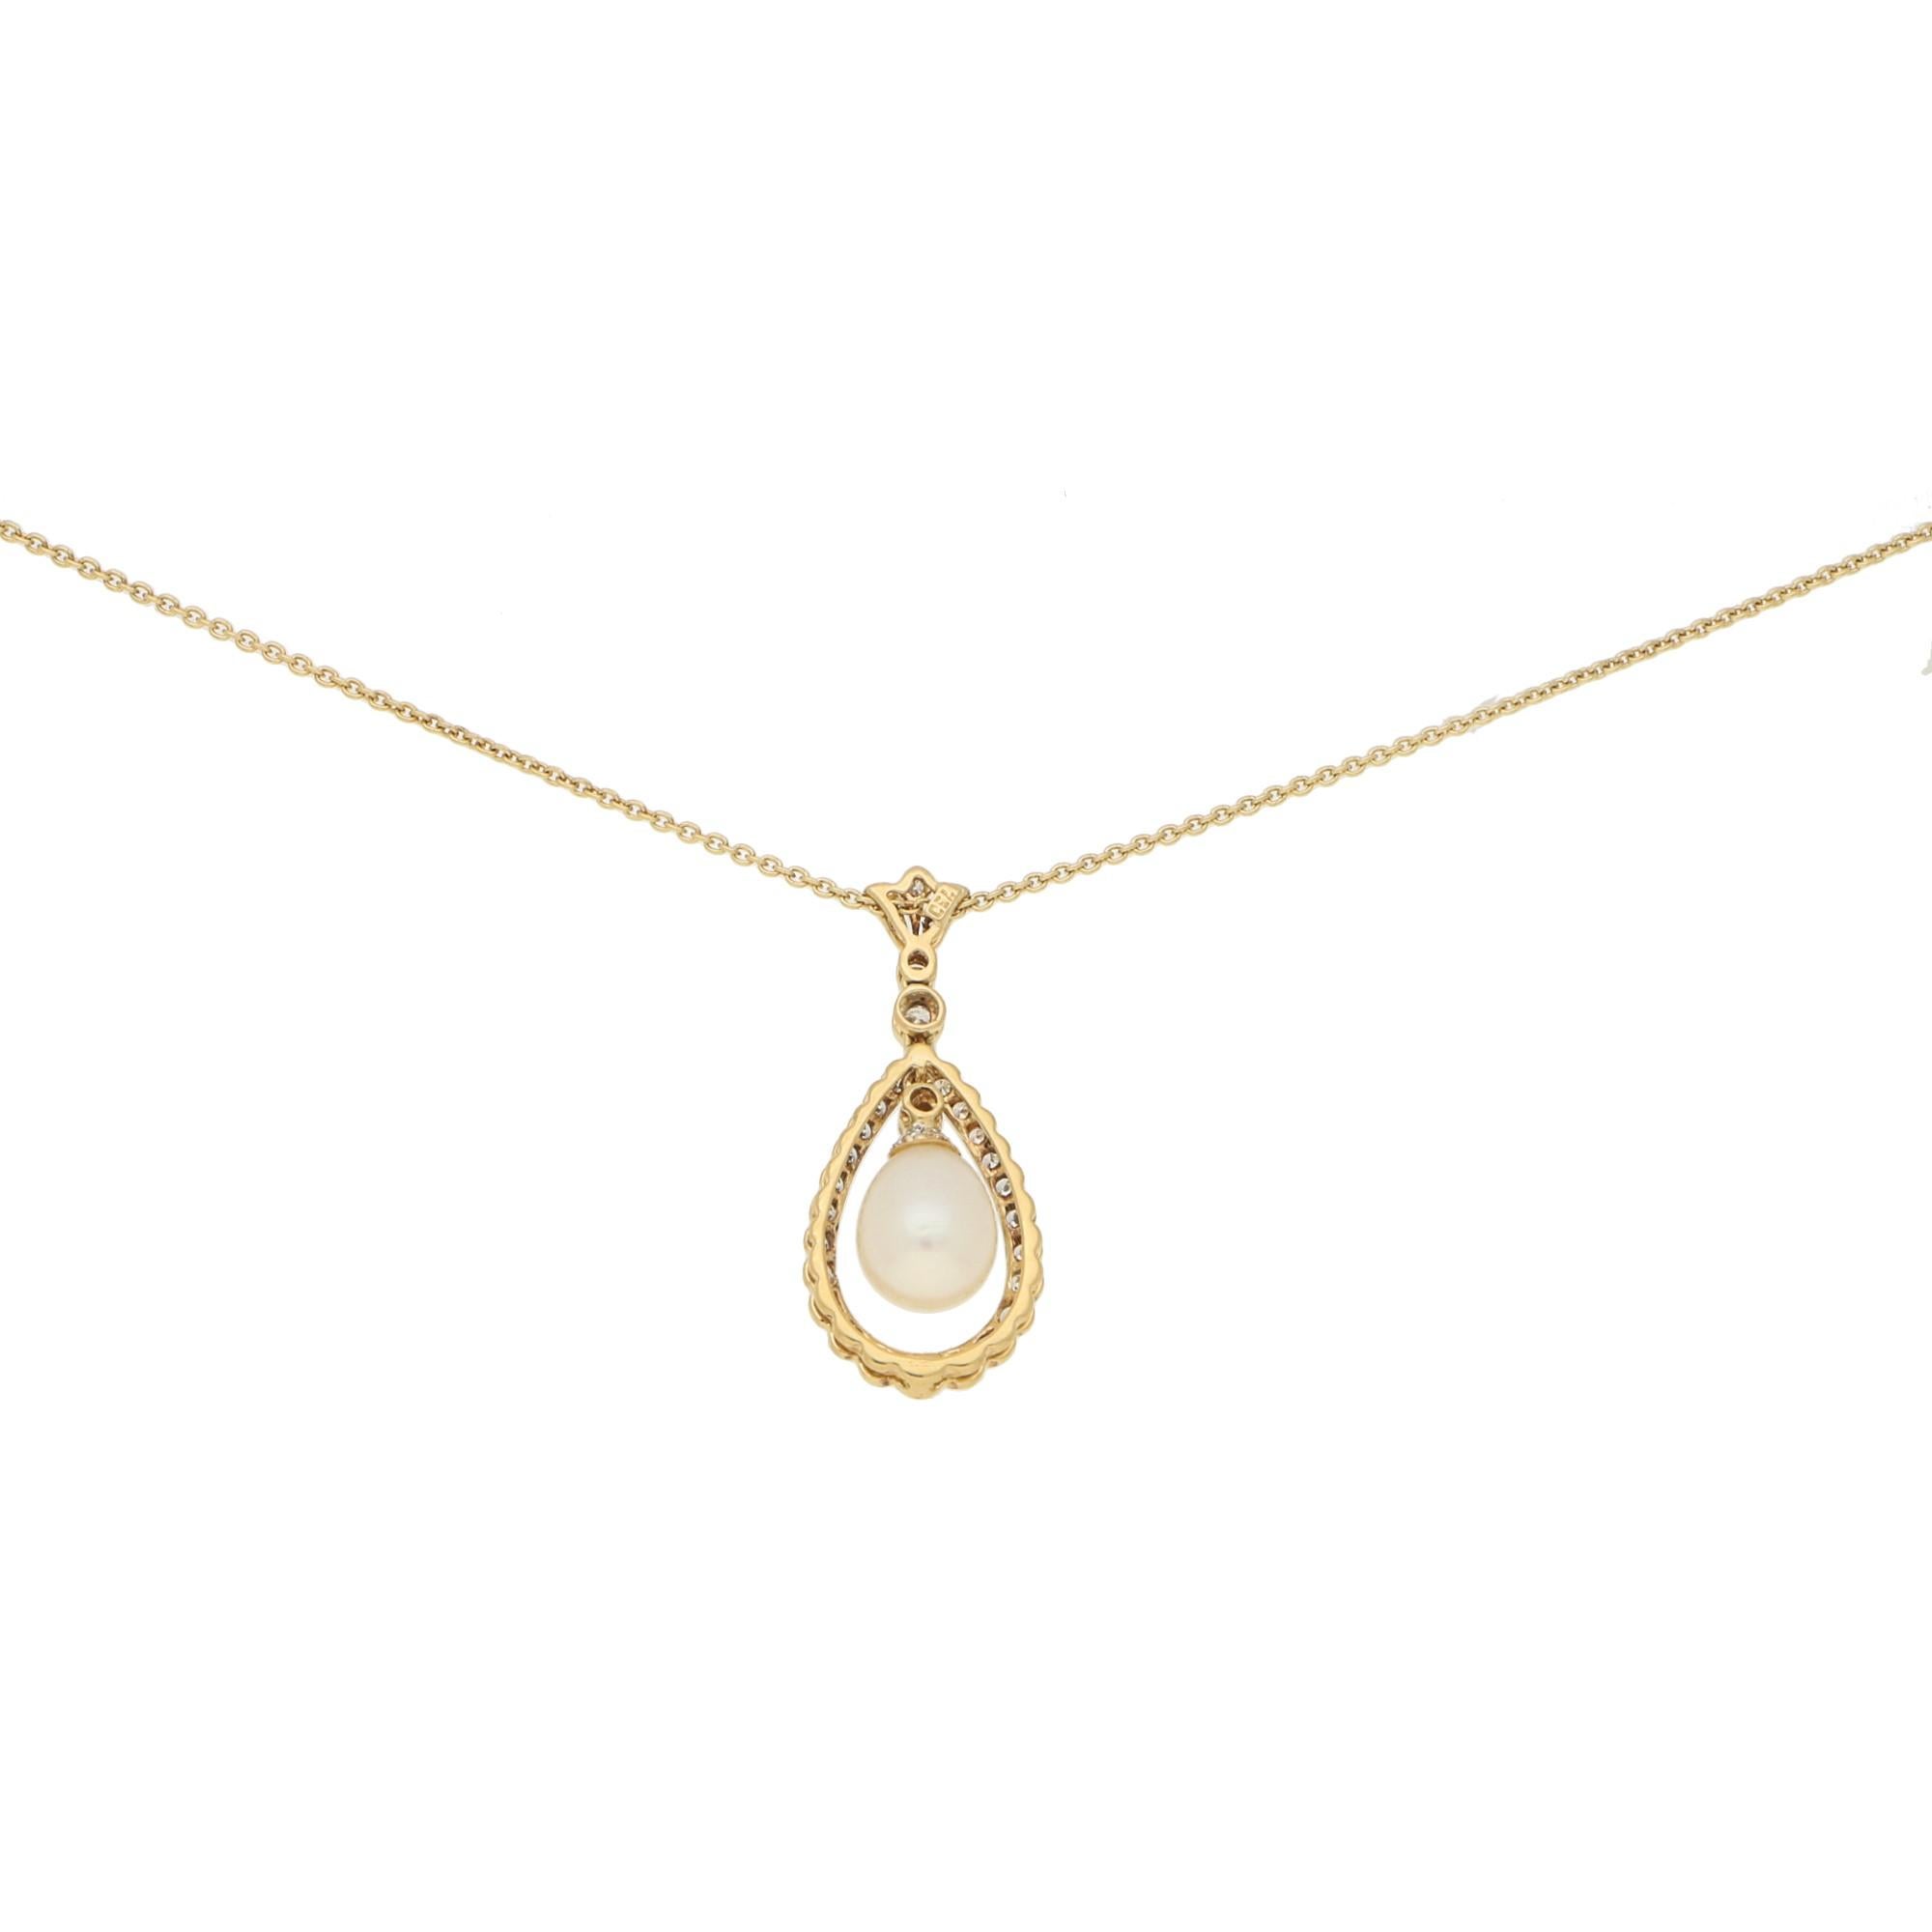  A beautiful pear shaped cultured pearl measuring approximately 7 x 9mm suspended from a diamond set drop with a pear shaped surround below an articulated lotus flower with two further droplets of diamond. 
There are 38 diamonds of varying sizes